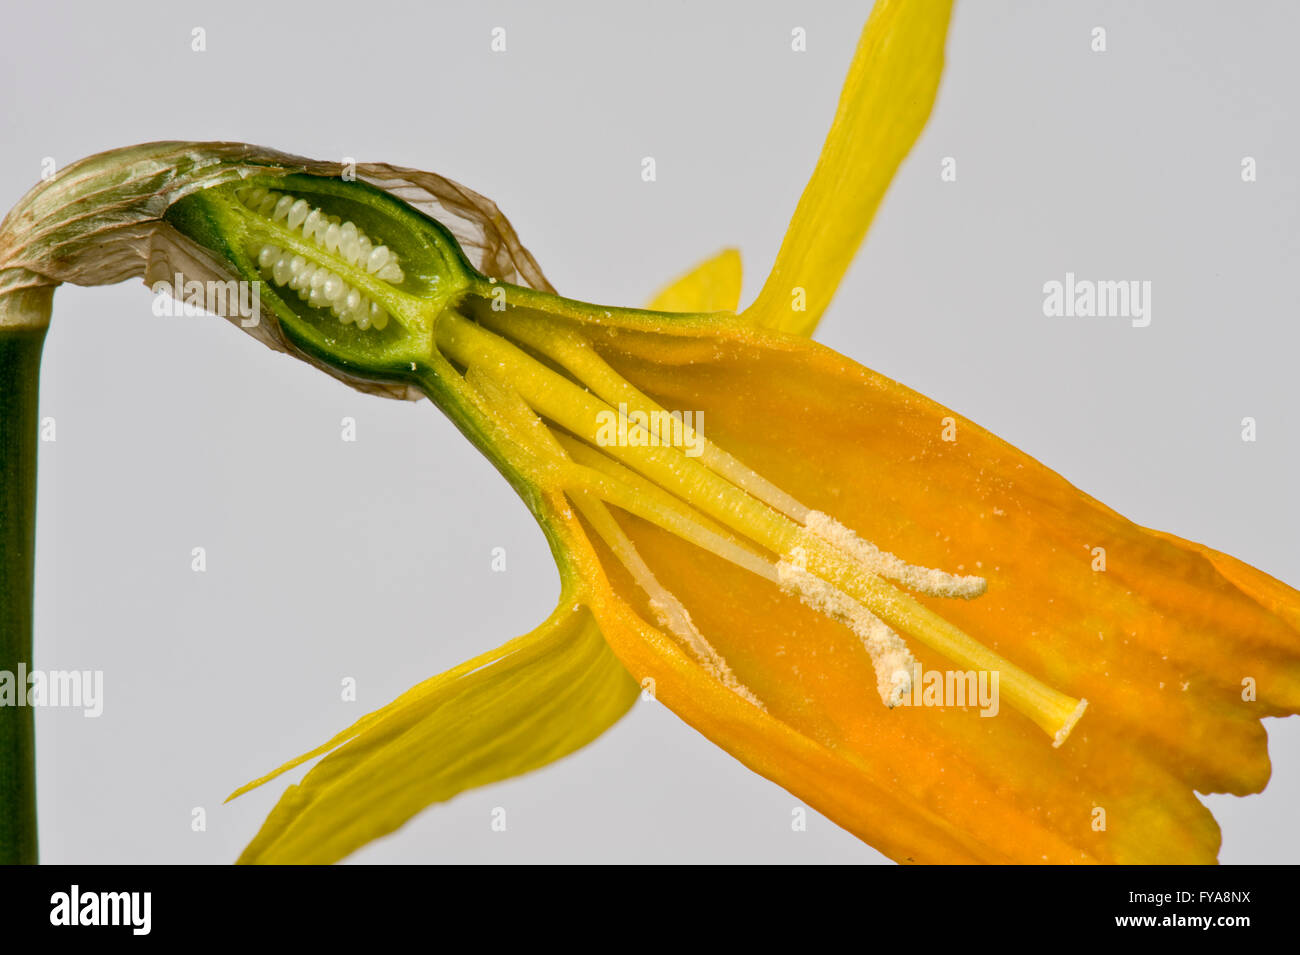 Section through a Narcissus cyclamineus 'Jetfire' daffodil flower showing the structures with the trumpet Stock Photo